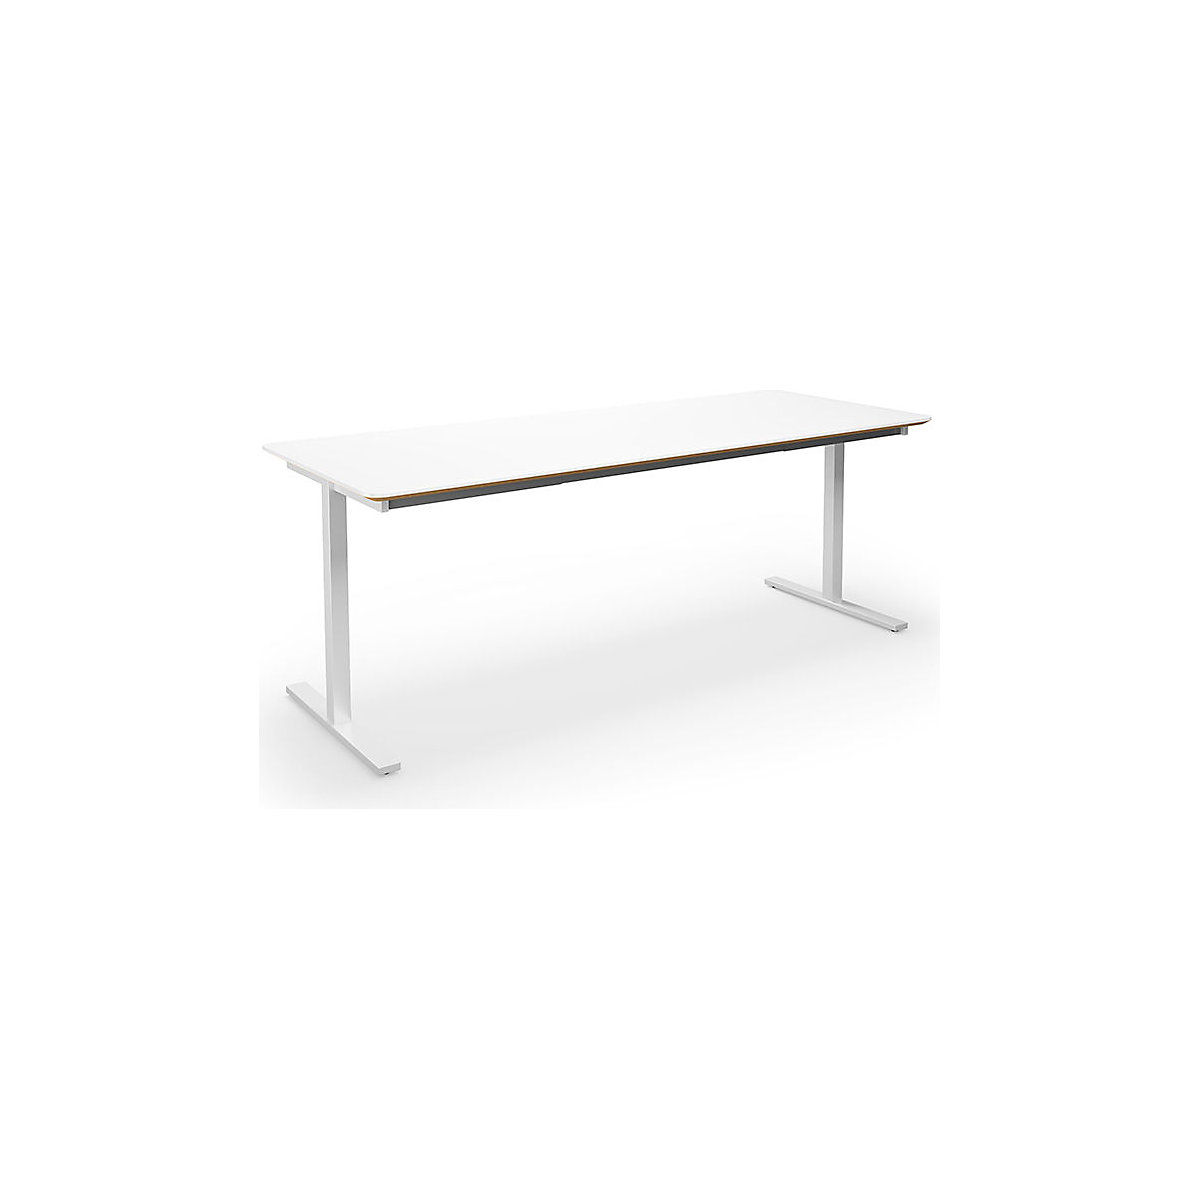 DUO-T Trend multi-purpose desk, straight tabletop, rounded corners, WxD 2000 x 800 mm, white, white-1